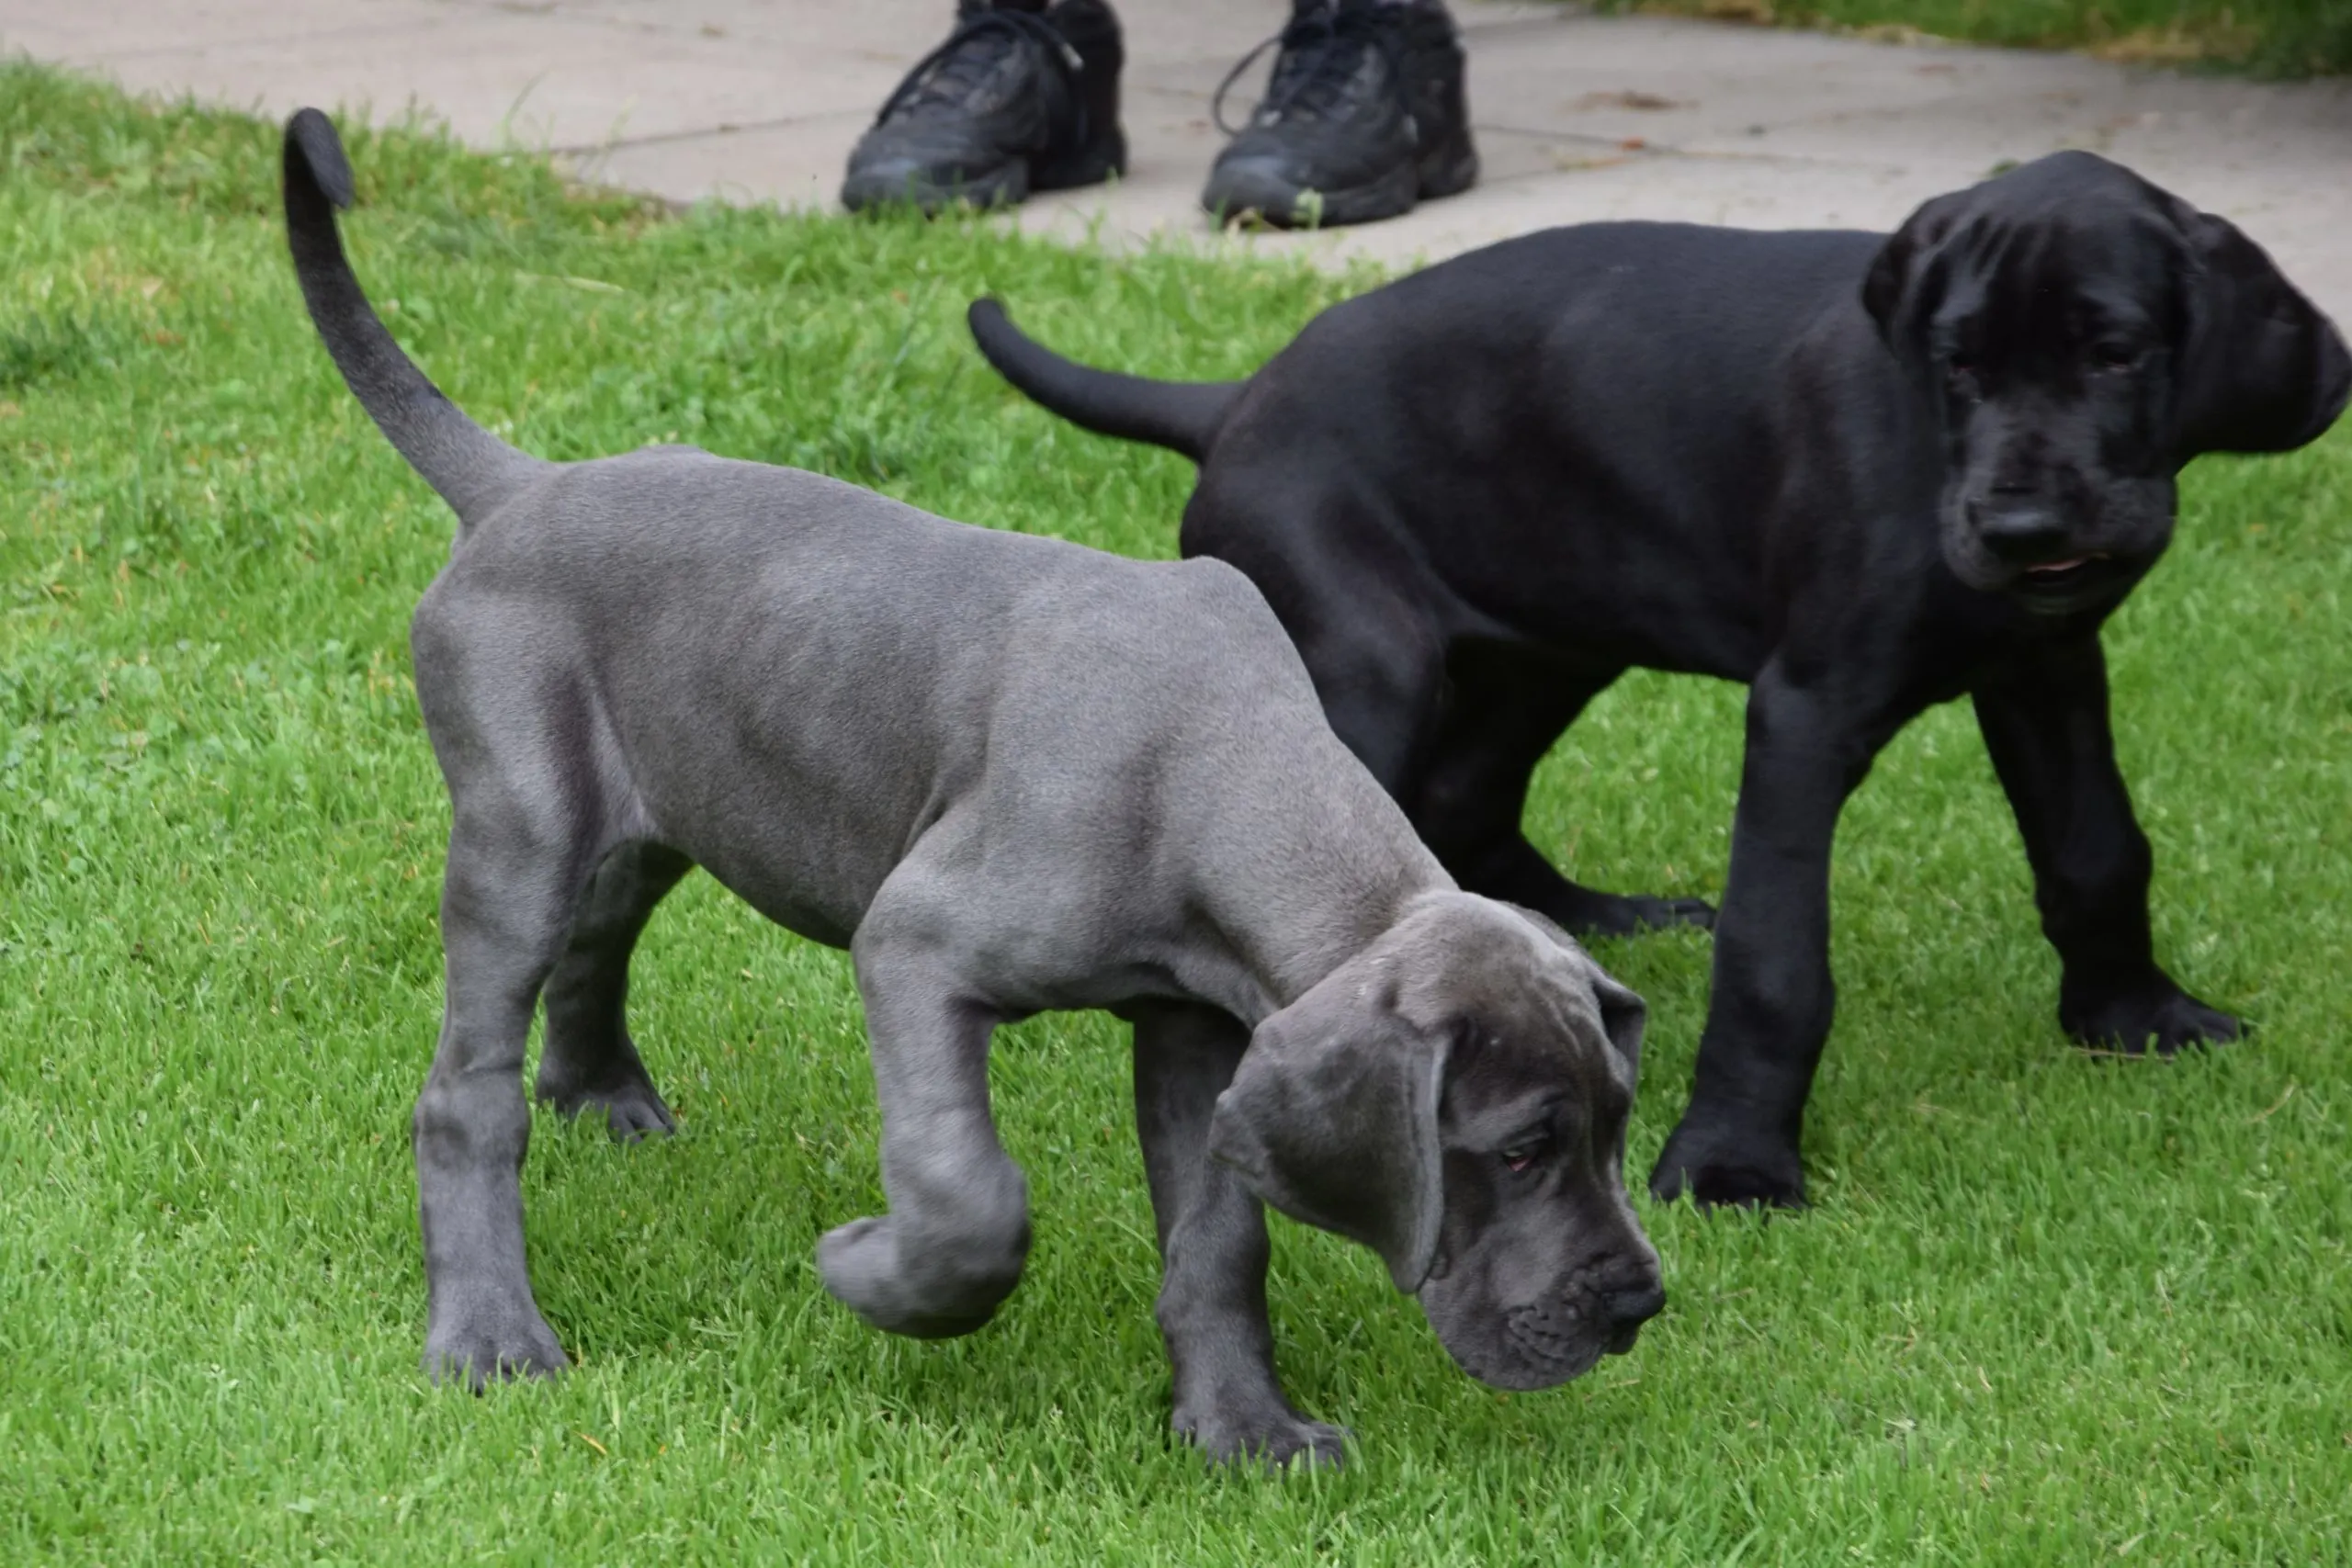 What Is The Rarest Great Dane Color? One gray and black Great Dane puppy walking in a garden